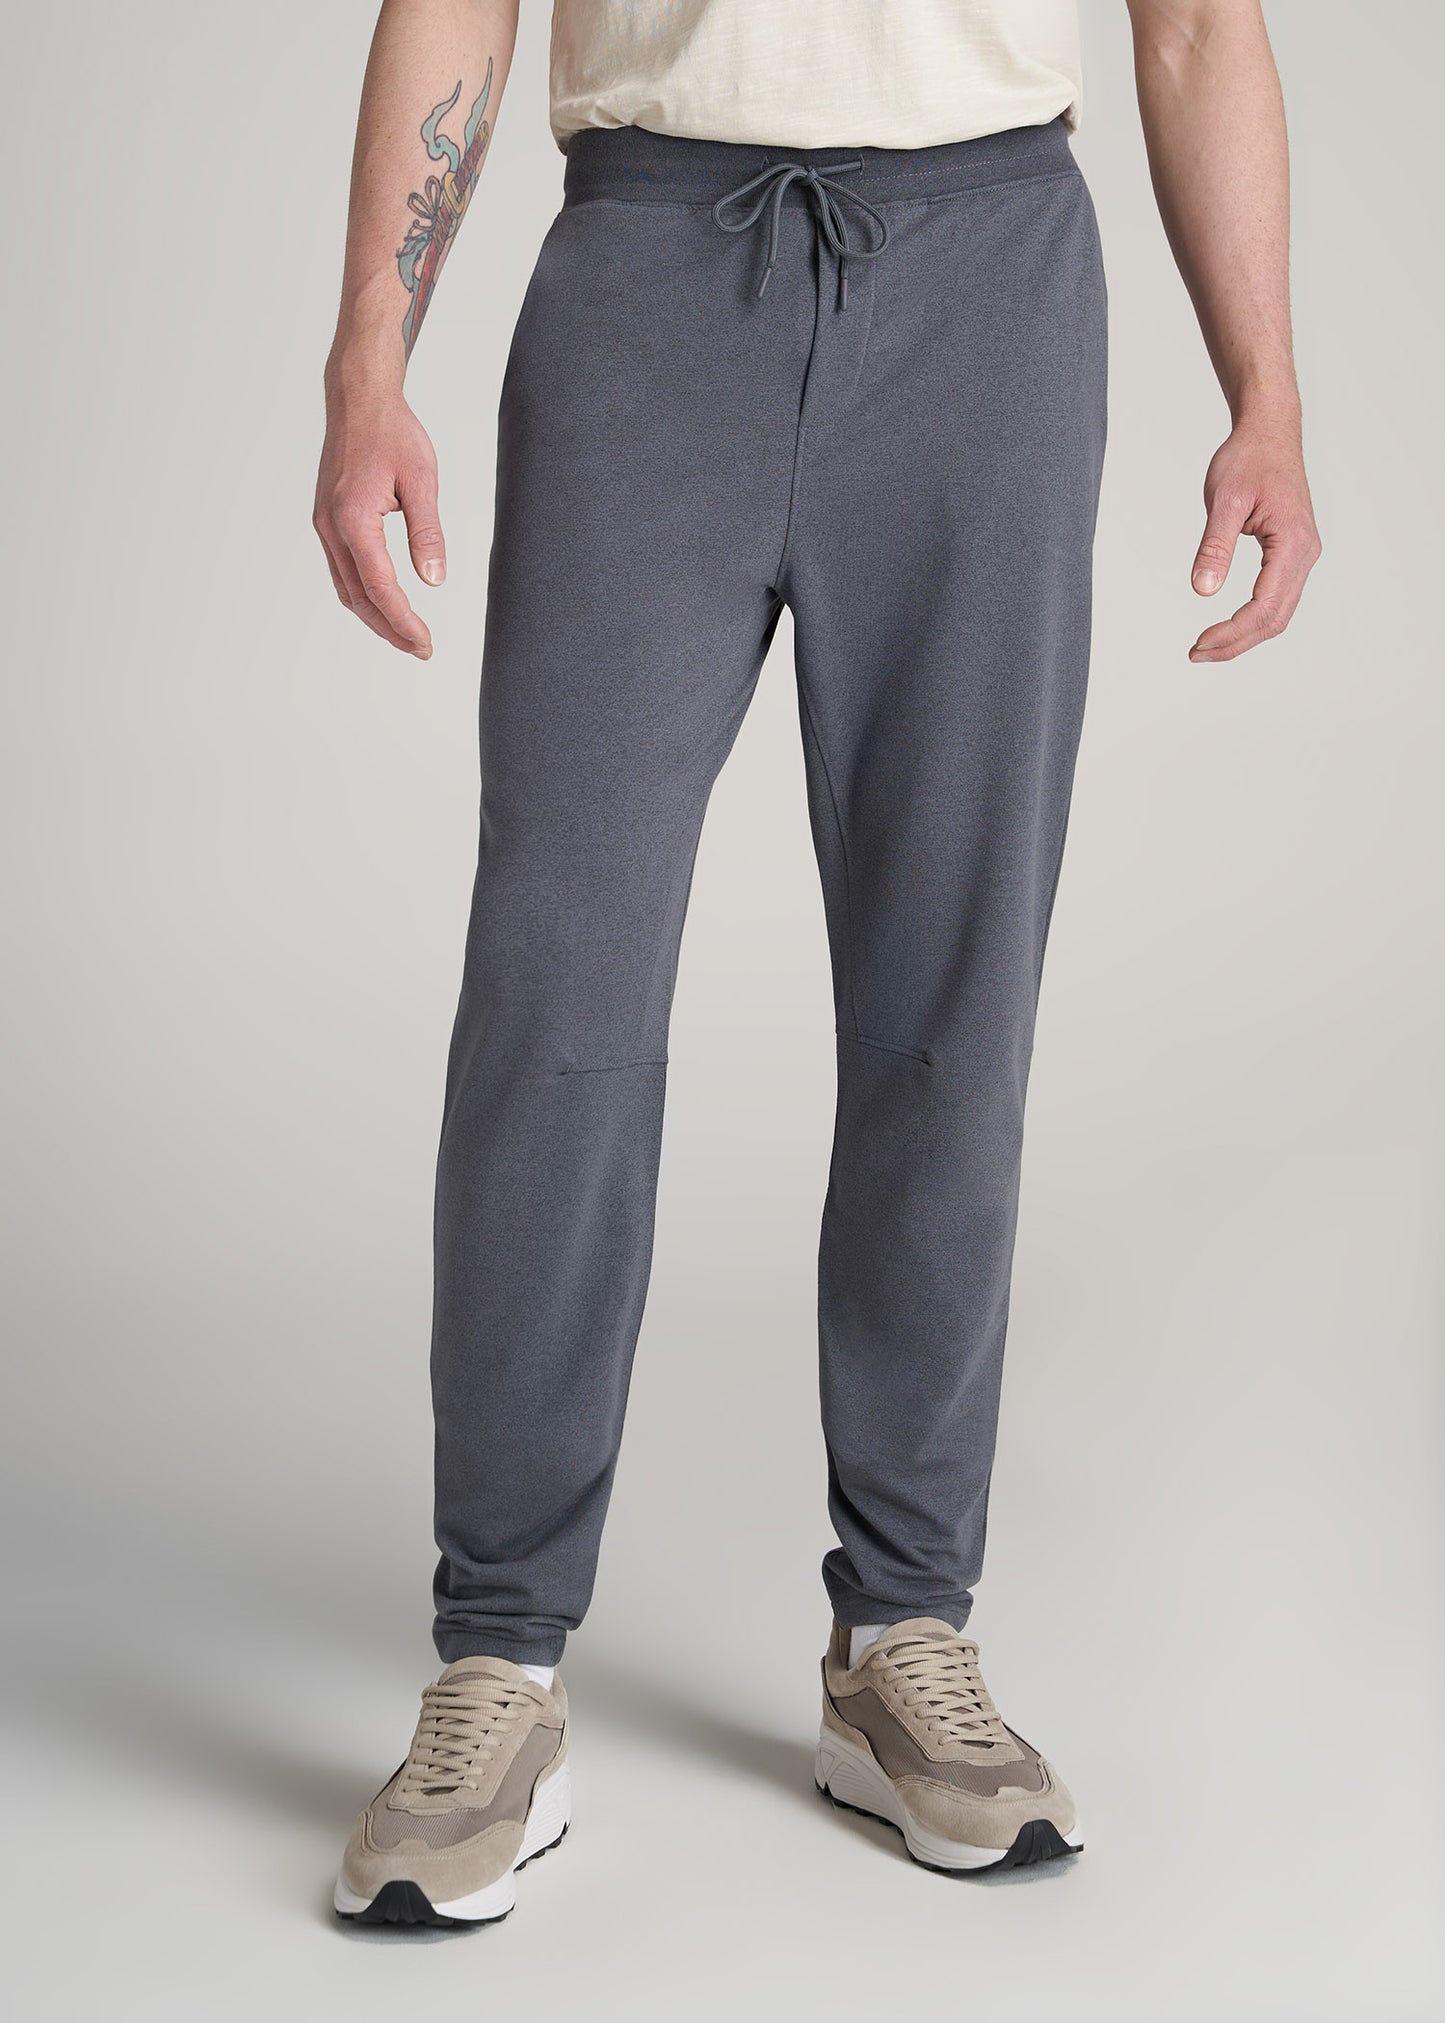       American-Tall-Men-Performance-Tapered-French-Terry-Sweatpants-Charcoal-Mix-front